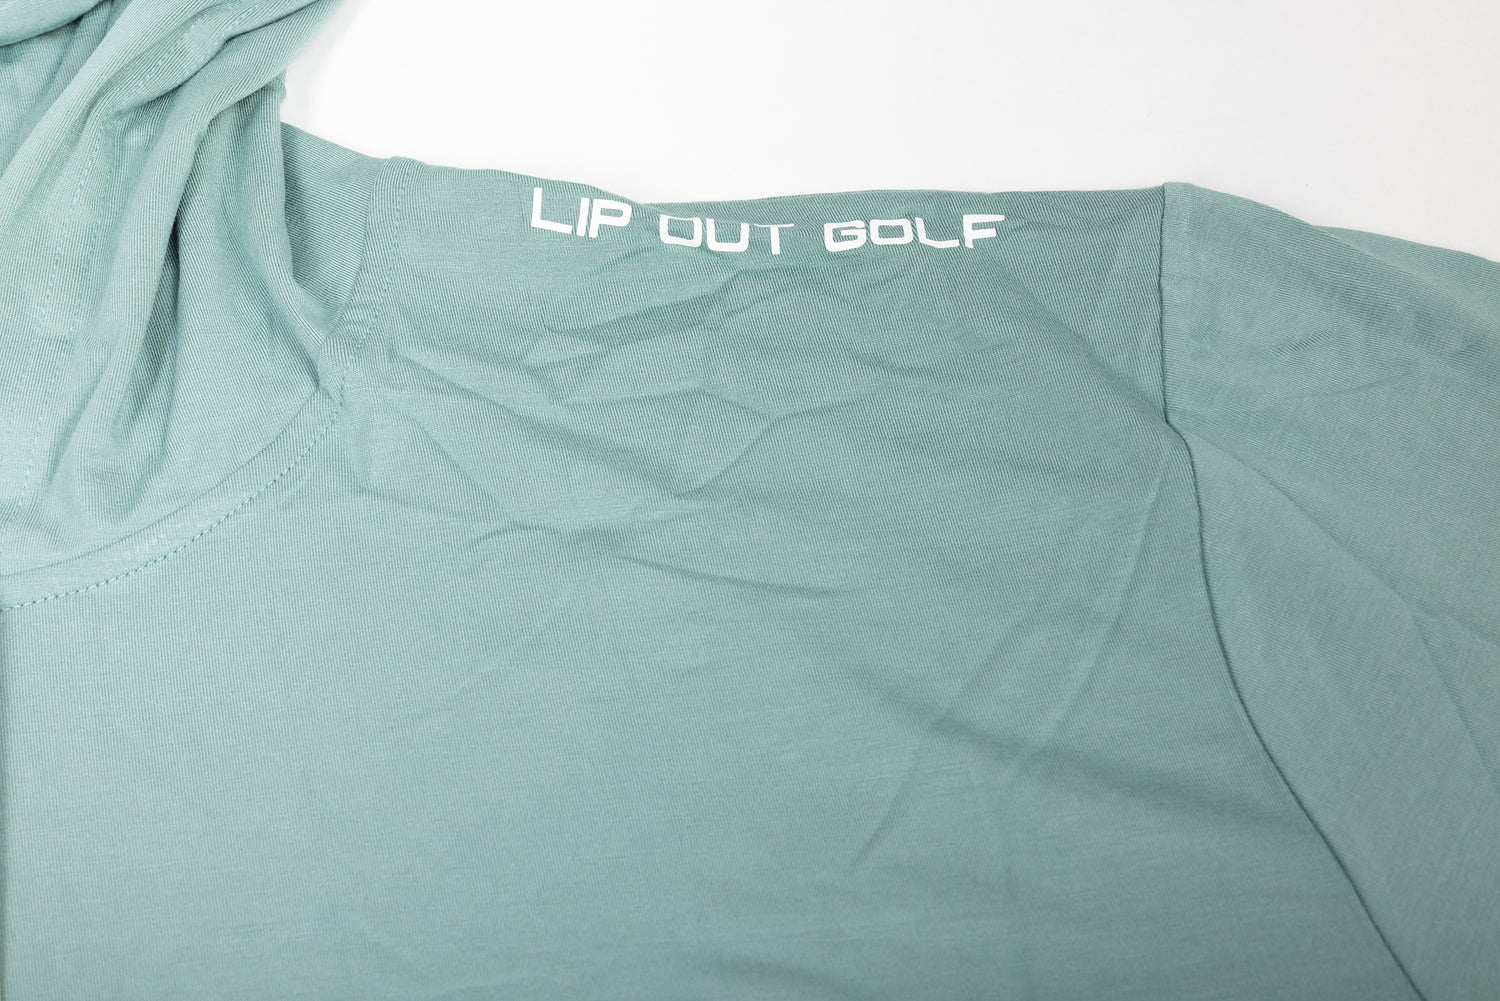 Lip Out Golf Bamboo Pullover Ultra Soft